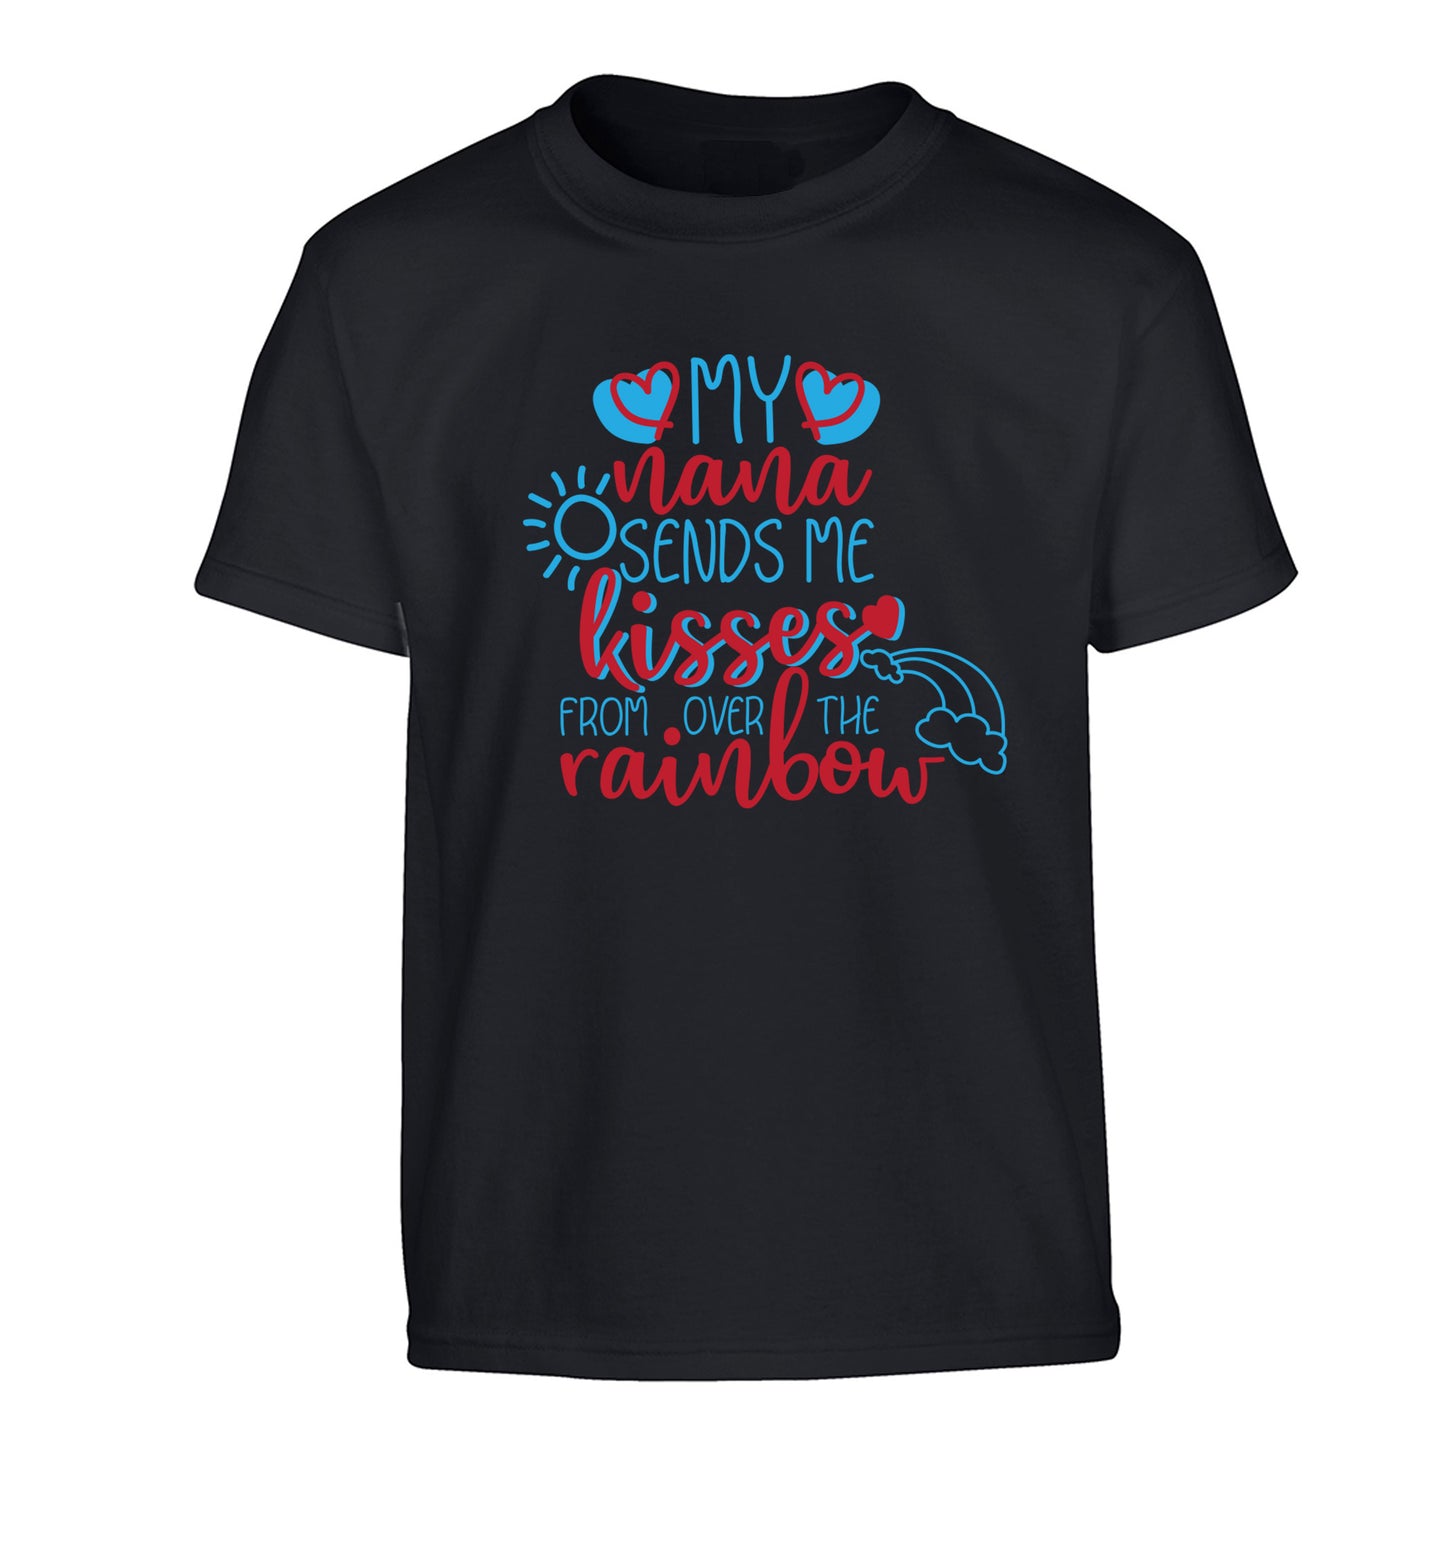 My nana sends me kisses from over the rainbow Children's black Tshirt 12-13 Years